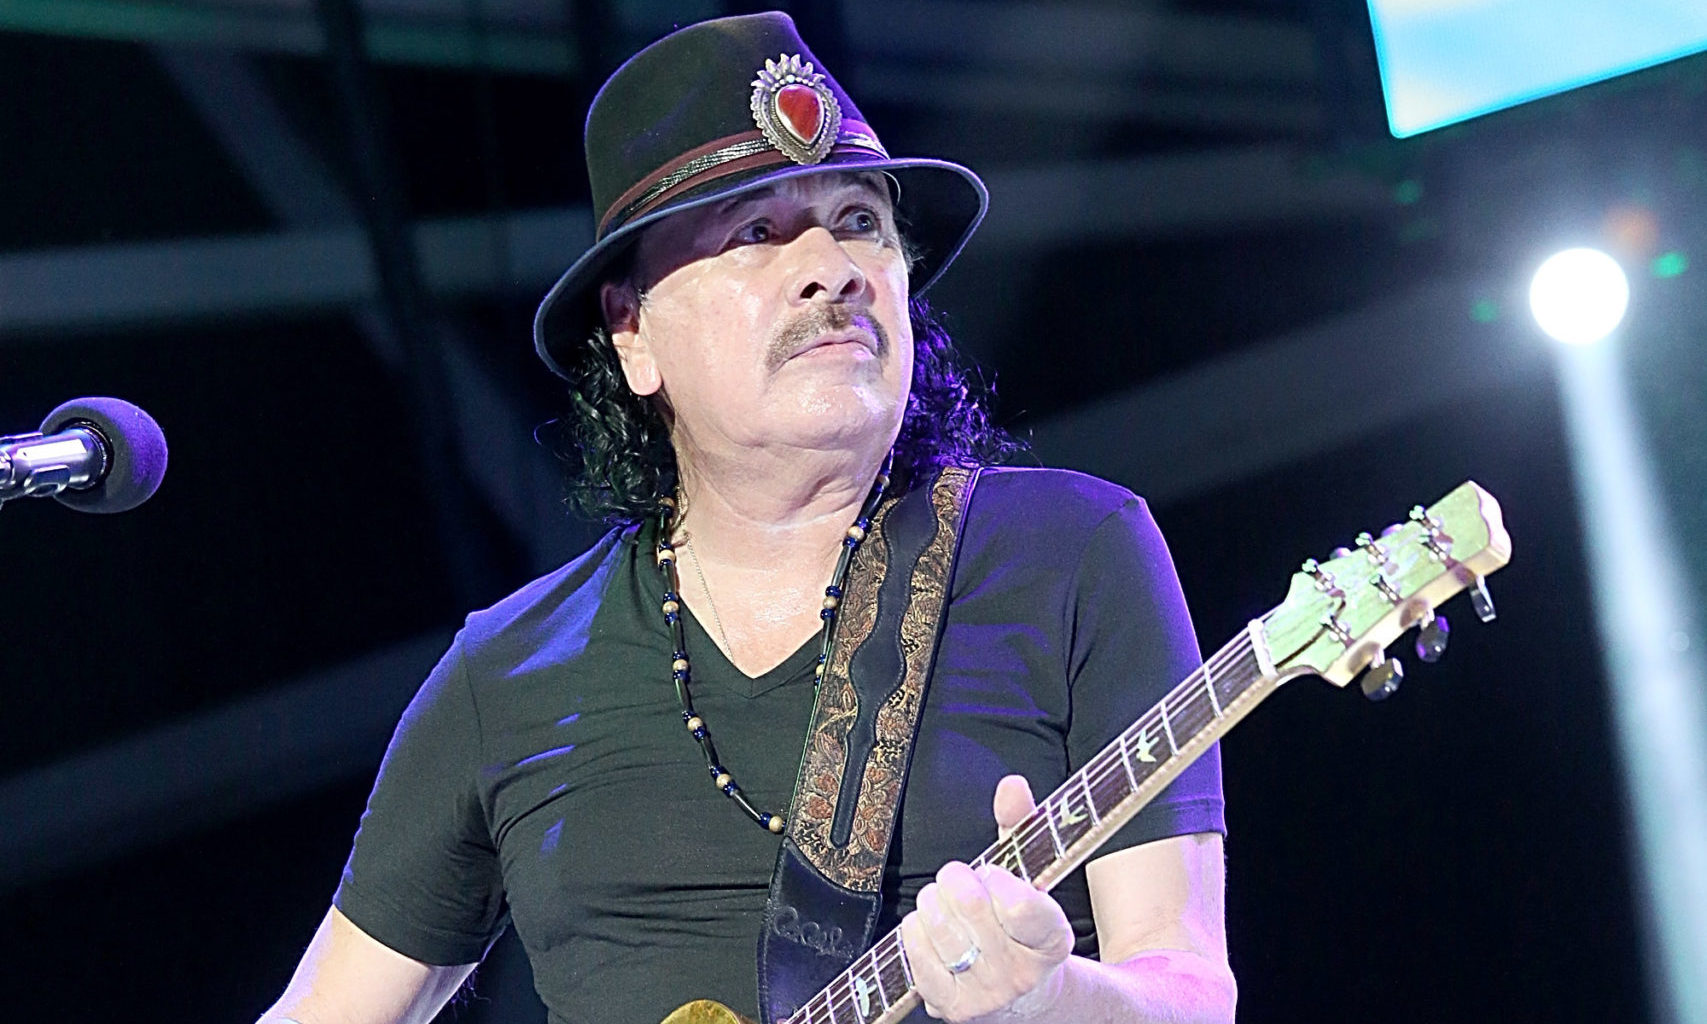 Carlos Santana passed out during the concert: "I forgot to eat and drink water"